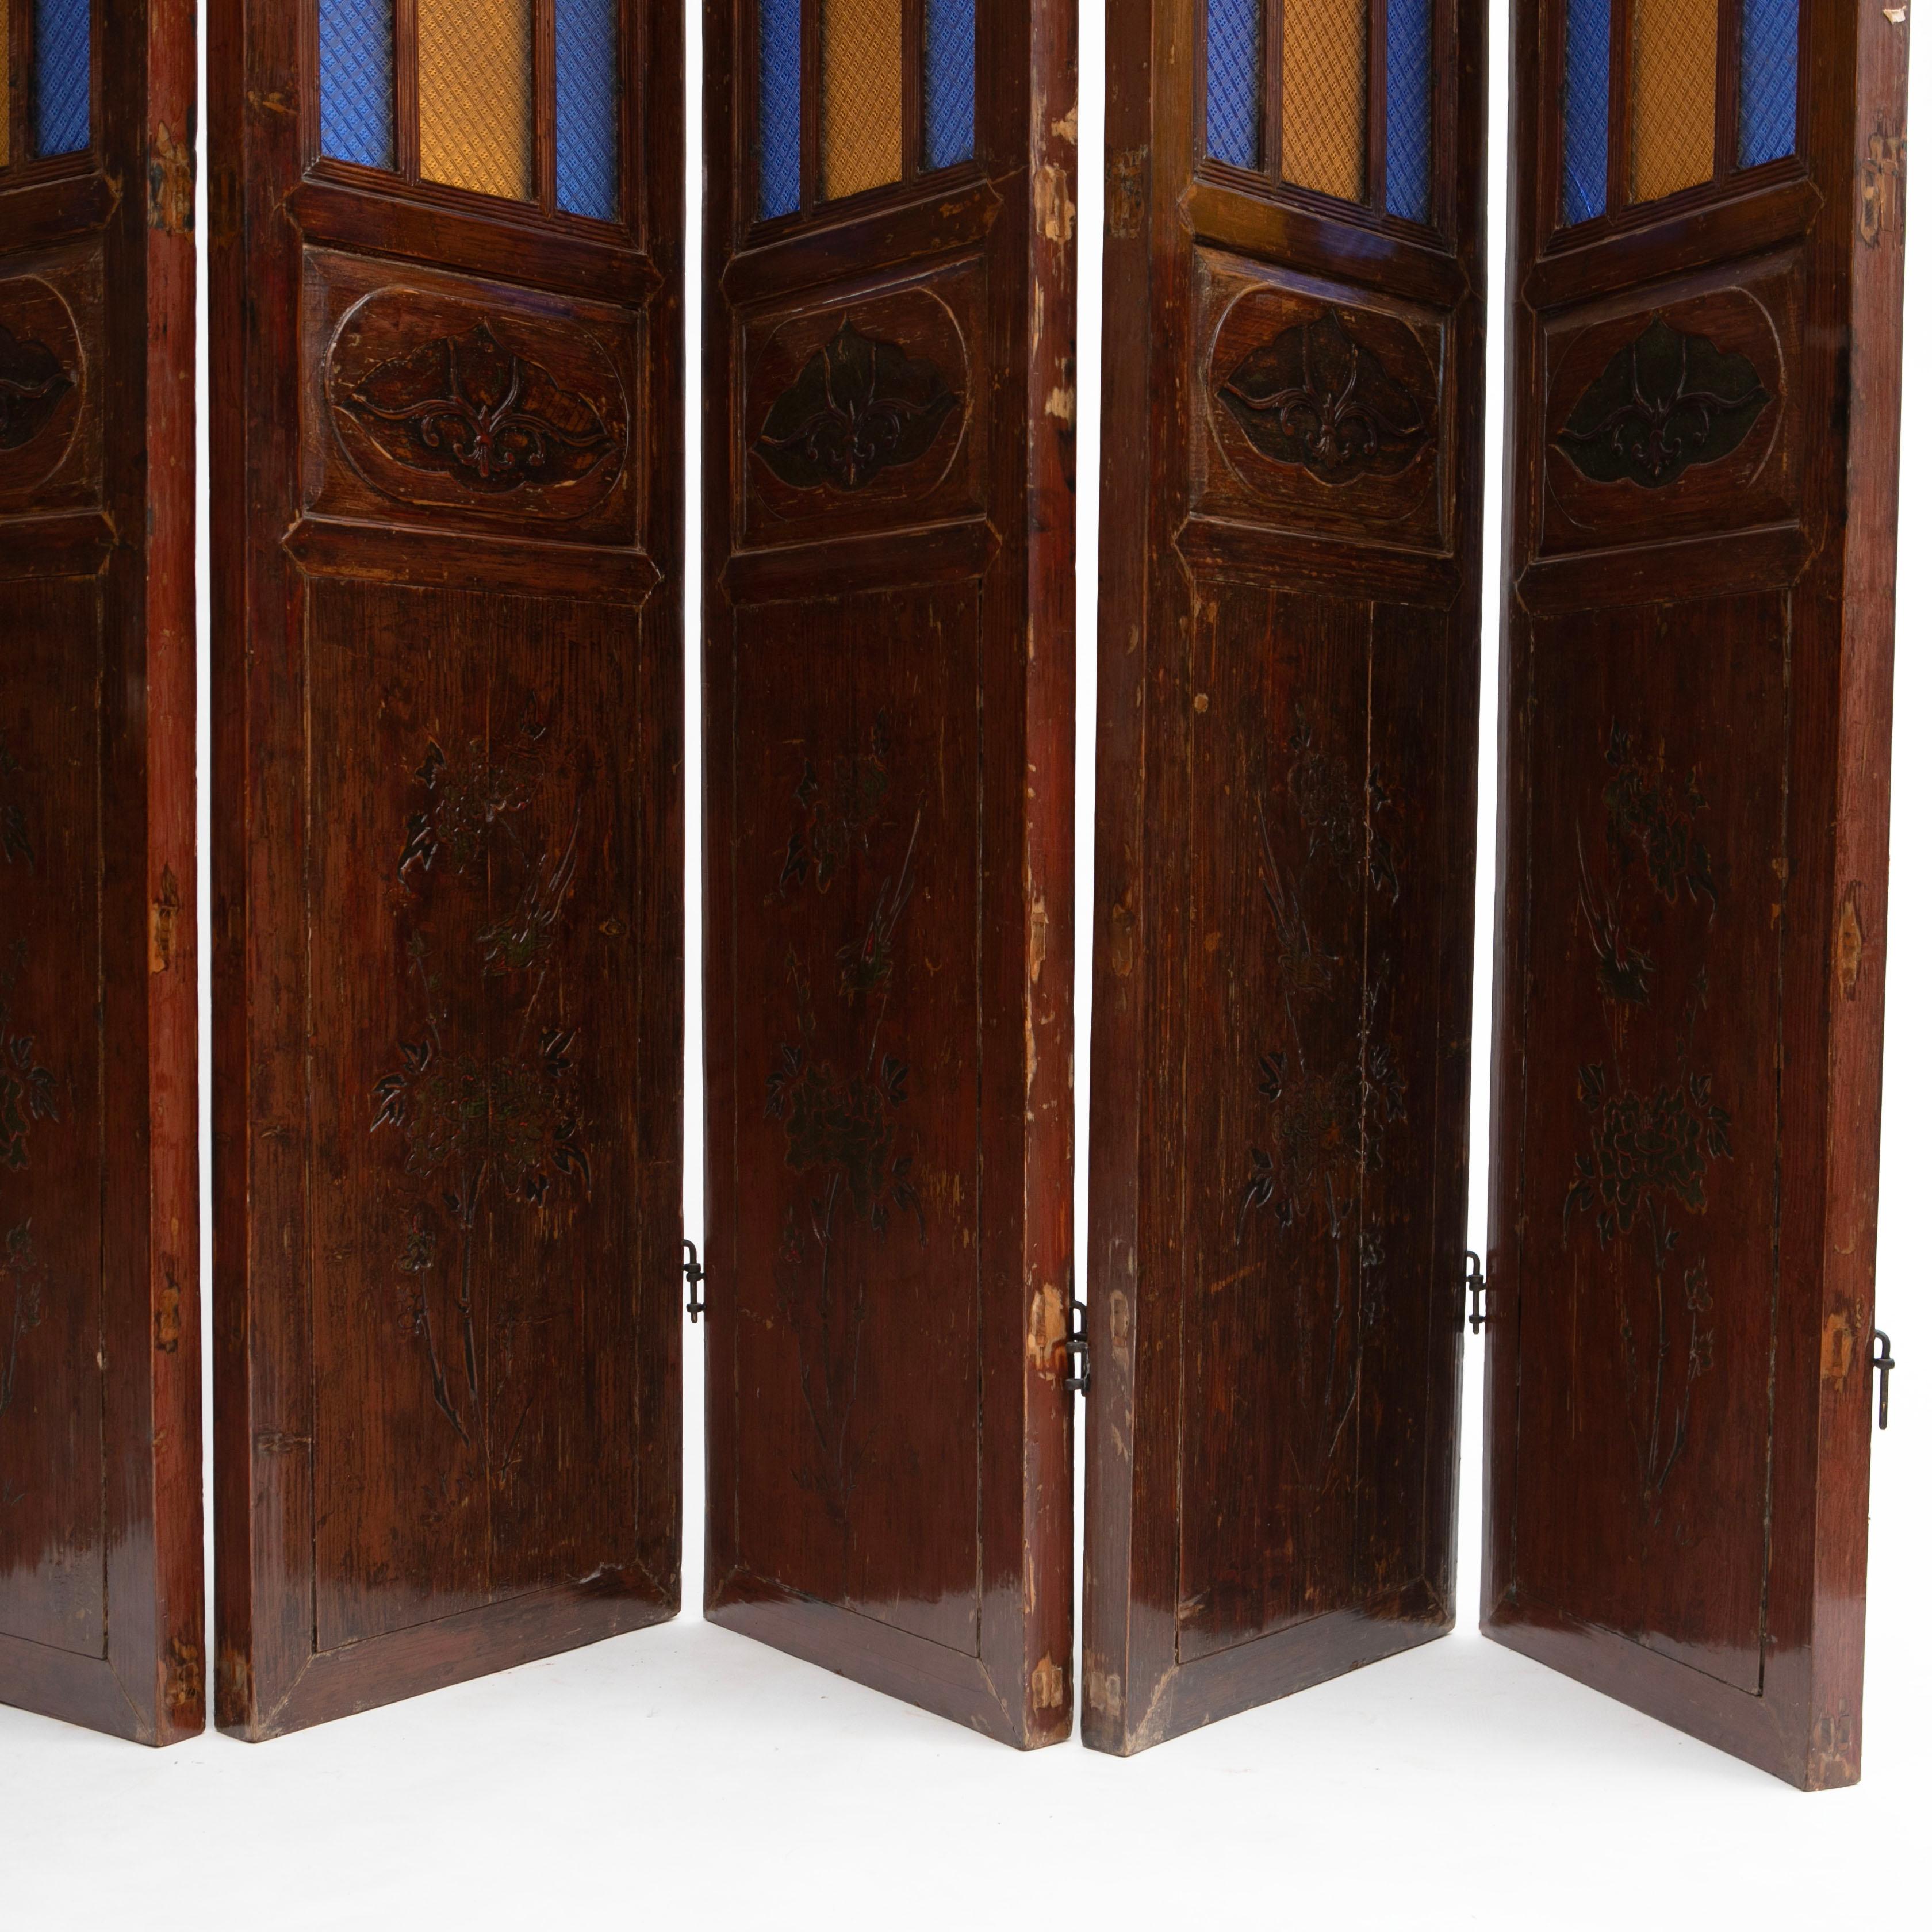 Lacquered Chinese Six-Panel Art Nouveau Floor Screen/ Room Divider, Shanghai, Approx. 1900 For Sale